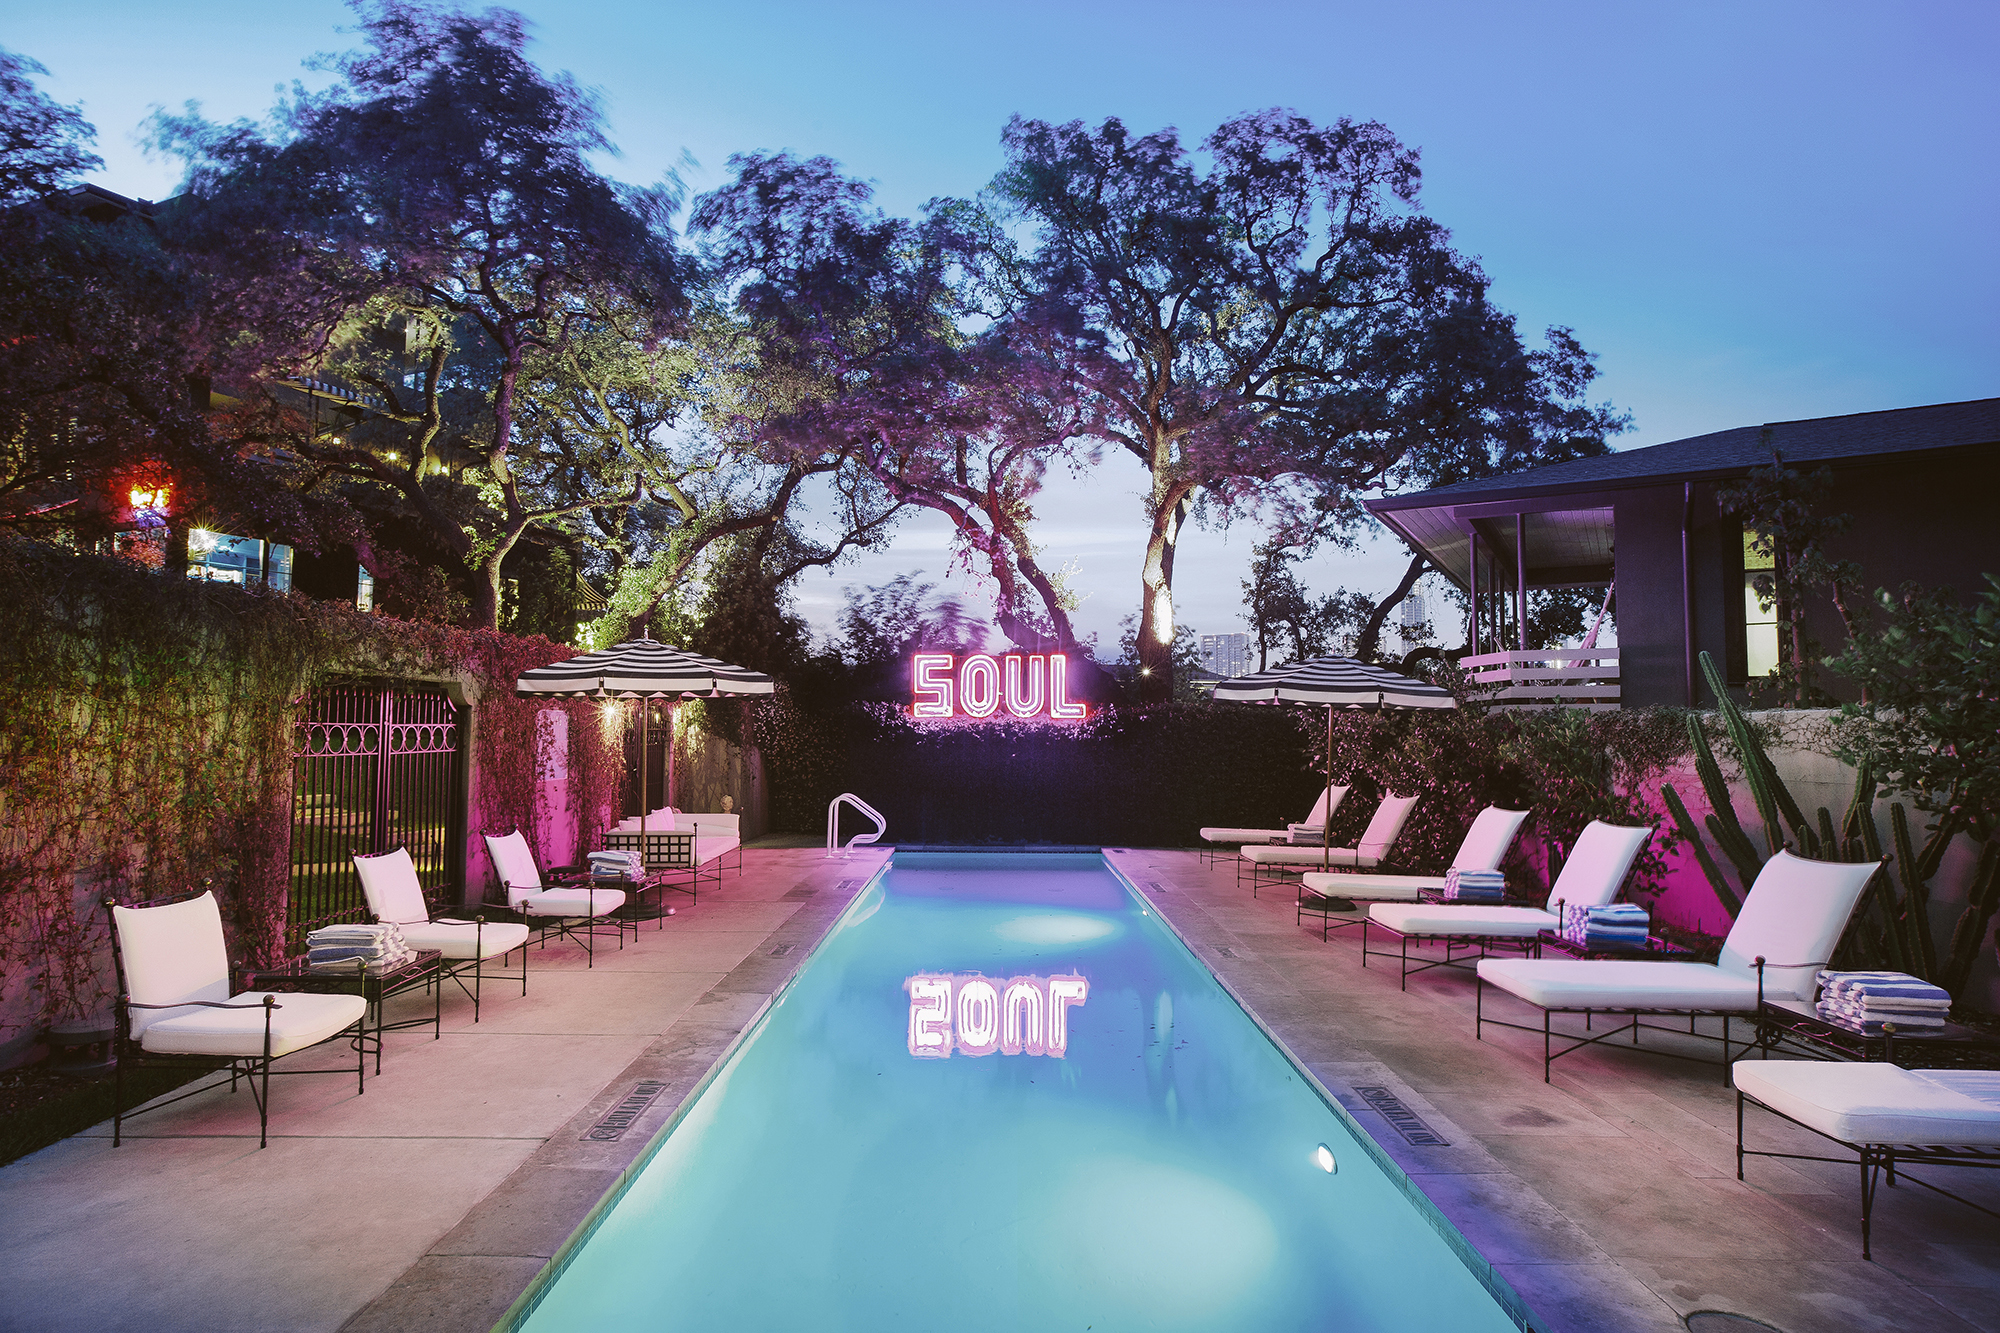 pool at dusk with SOUL neon light sign